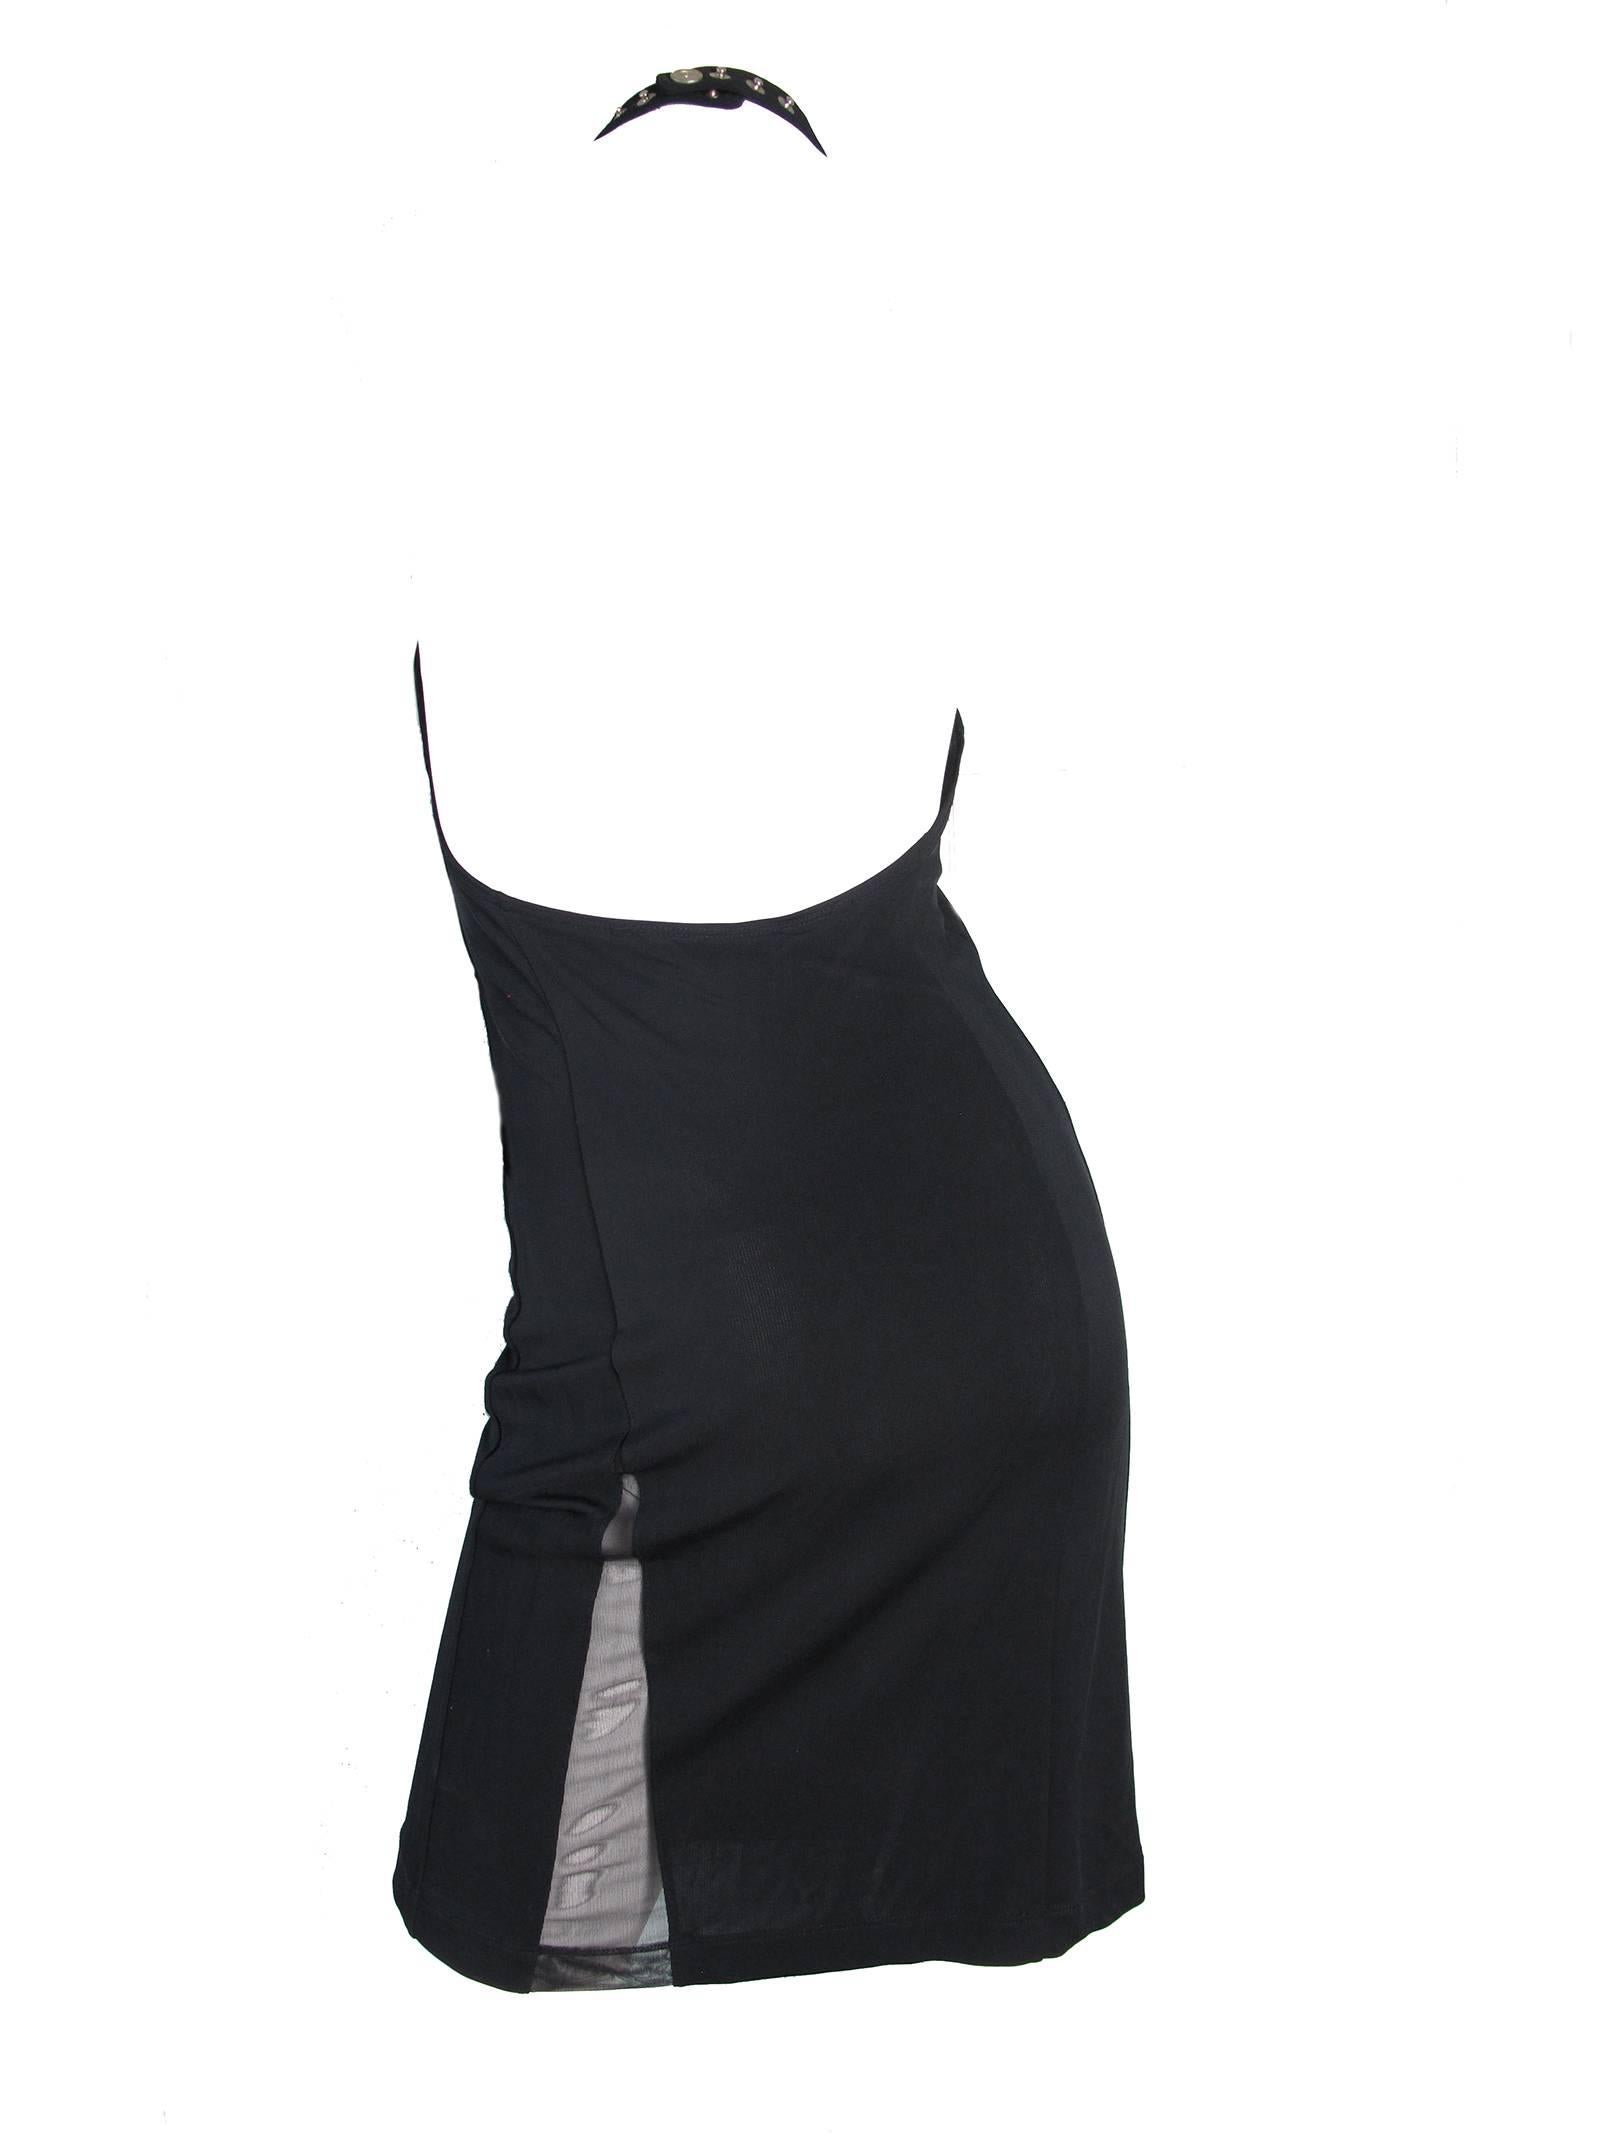 Gianfranco Ferre black hatler dress with mesh slit on front and back.  Snaps to close. Condition: Very good.  Size 40

We accept returns for refund, please see our terms.  We offer free ground shipping within the US.  Please let us know if you have